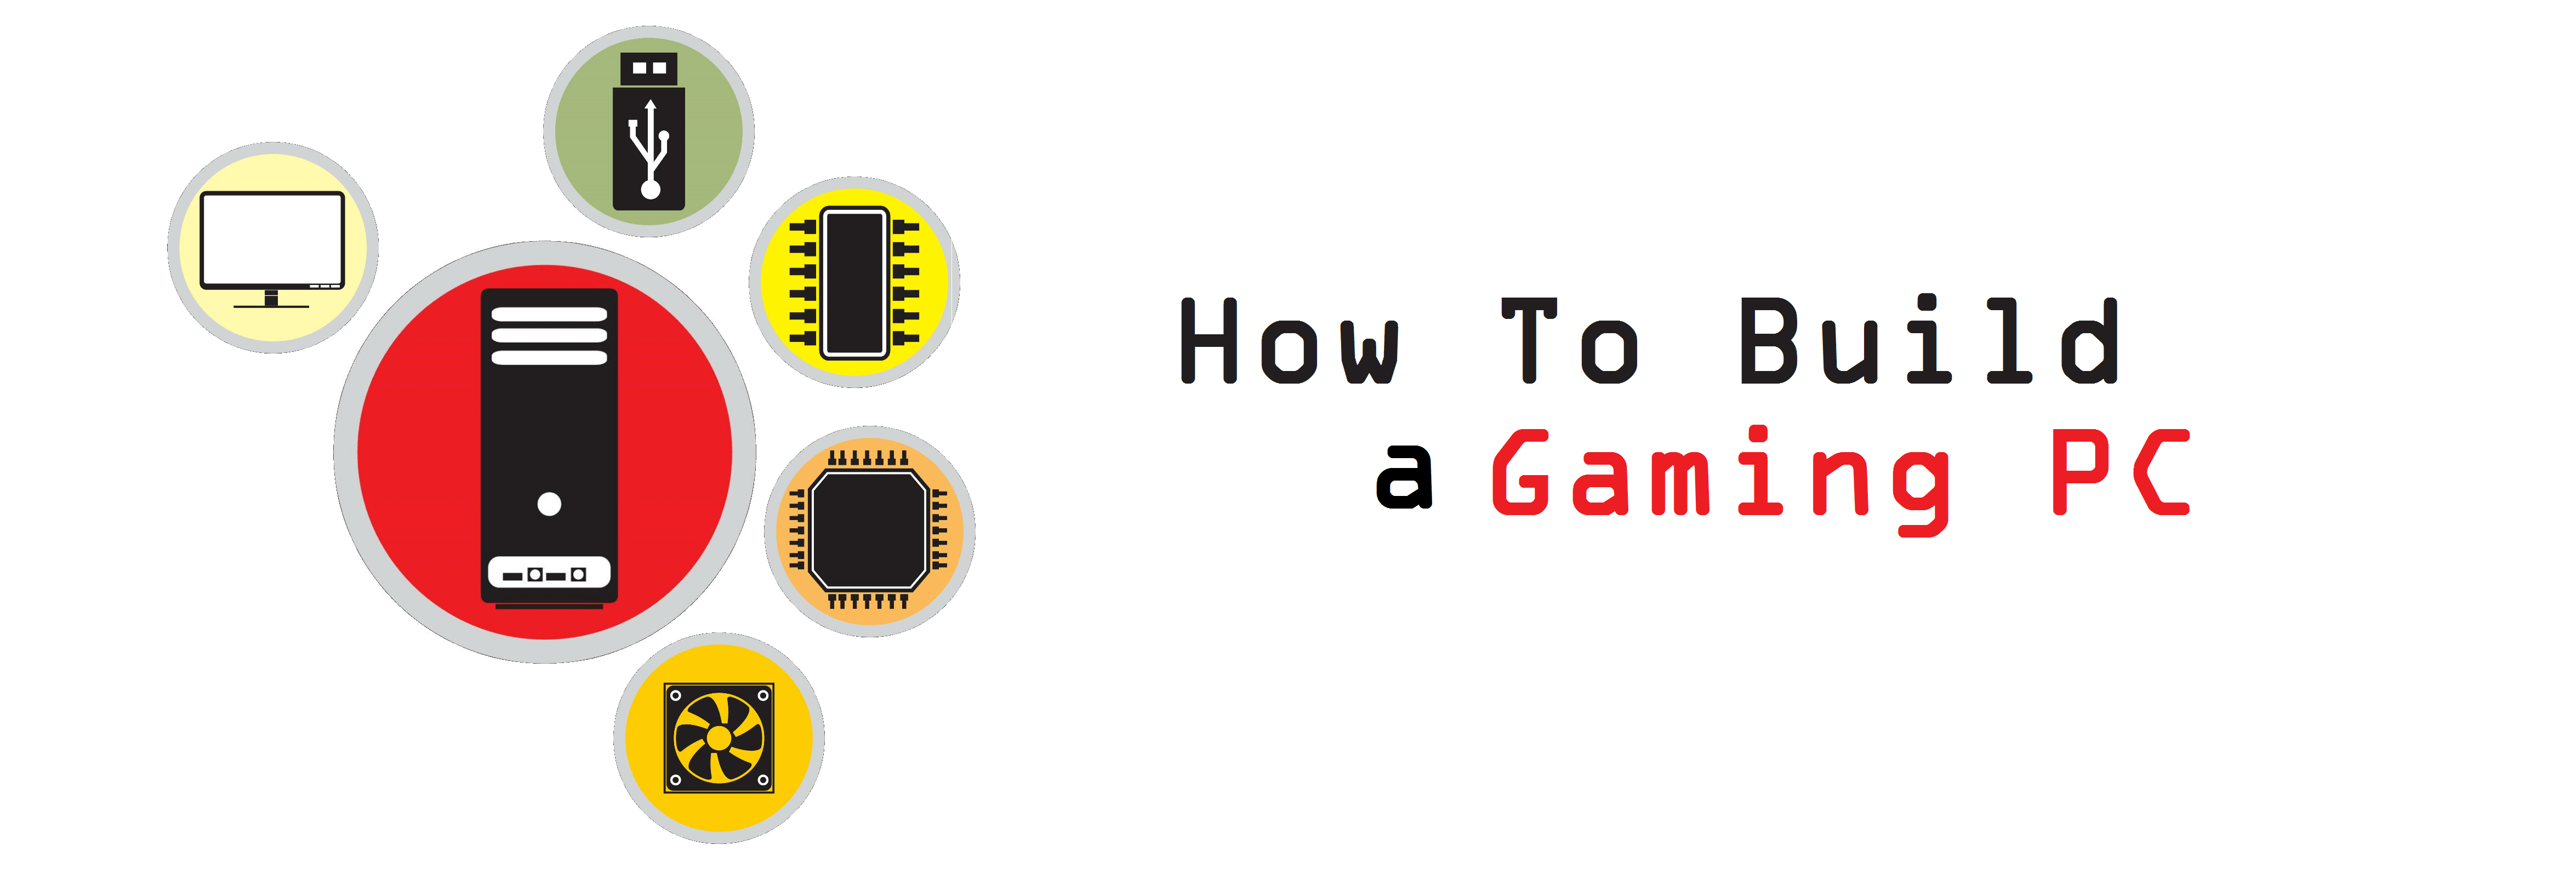 How to build a gaming PC title